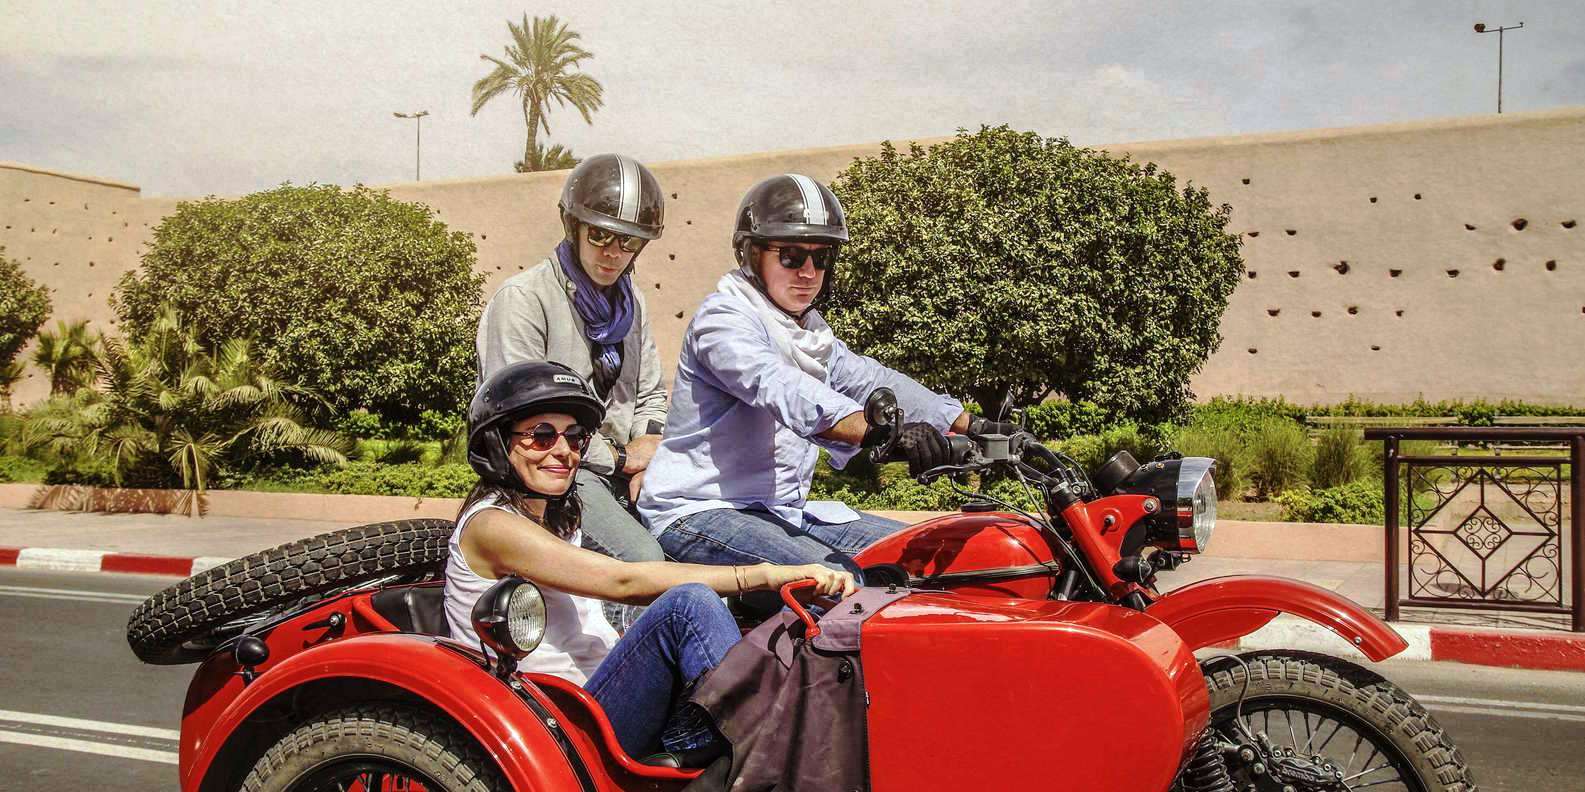 Morocco sidecar guided tour in Marrakech to explore Marrakesh and its medina